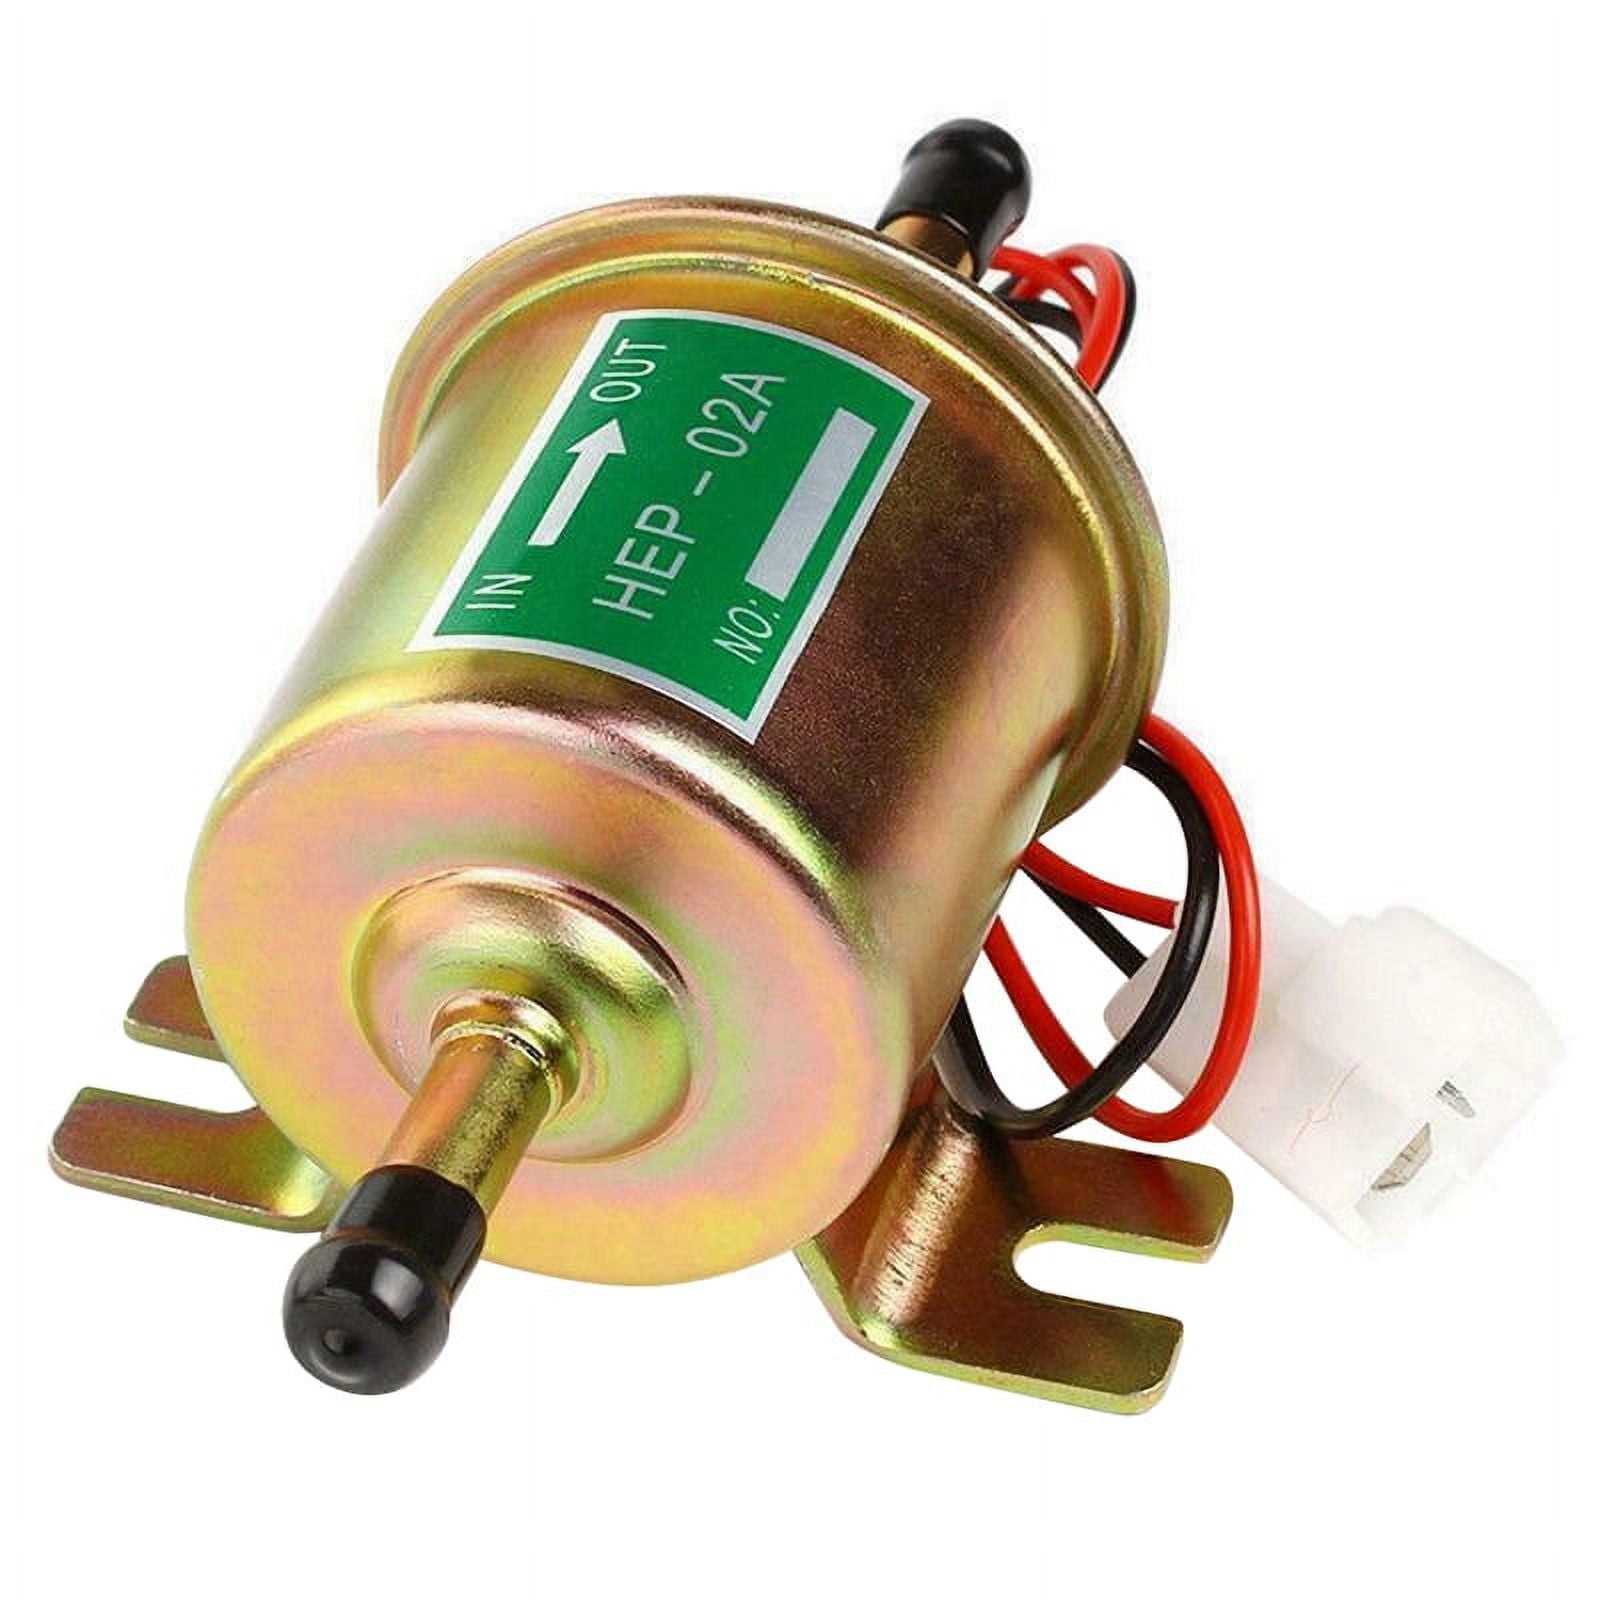 Universal Gas and Diesel Electric Fuel Pump DC 12V (Output Pressure 3-6  PSI) Heavy Duty Inline Fuel Pump Metal Solid Petrol 12 Volts HEP-02A